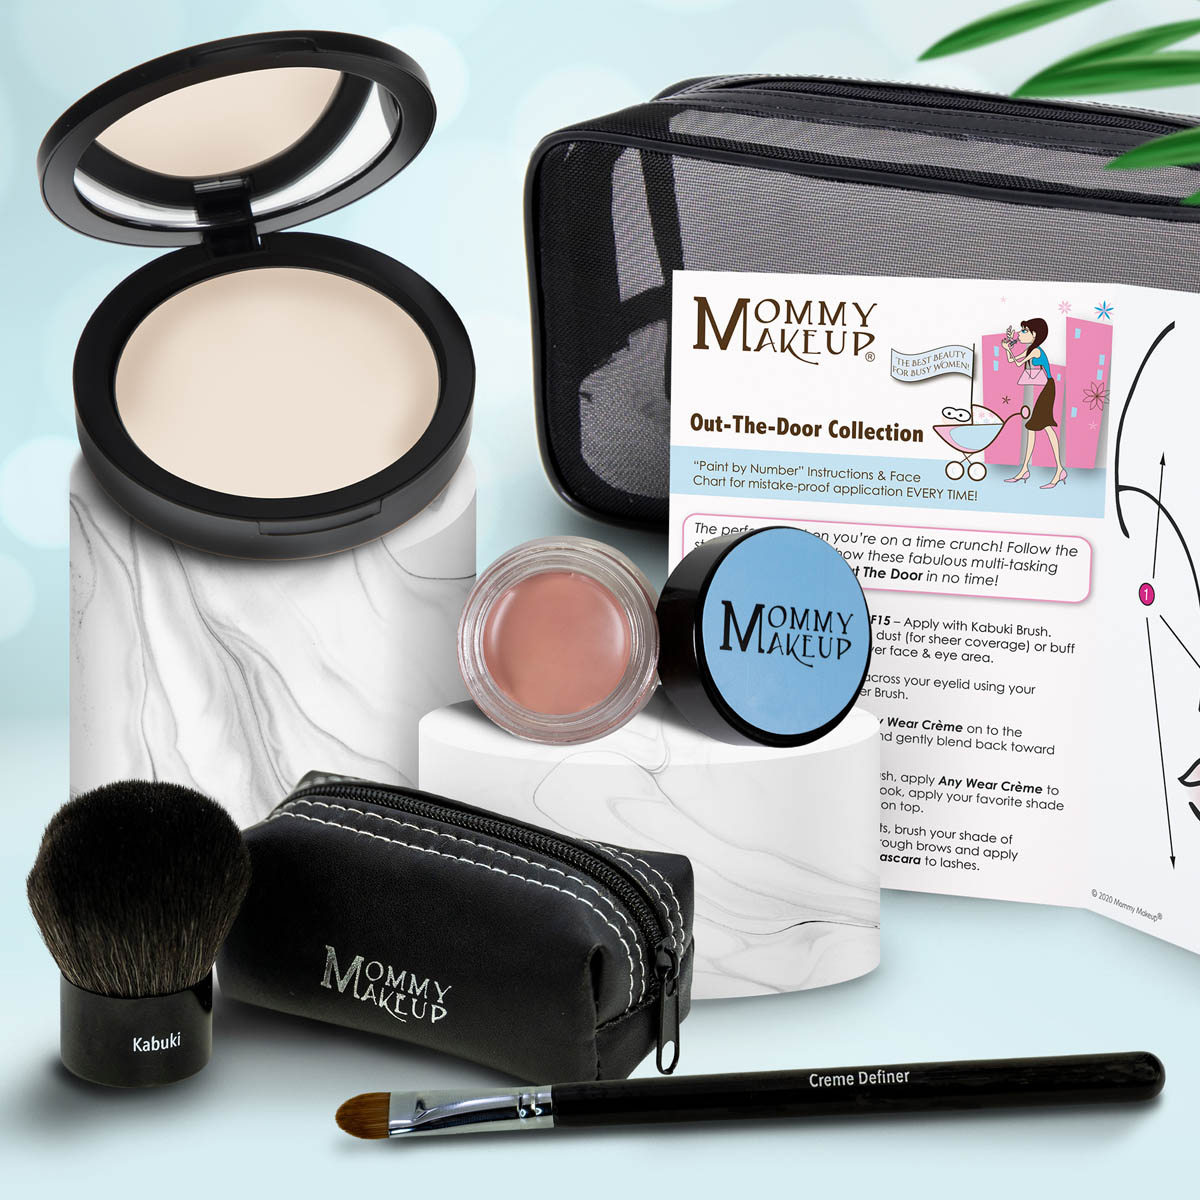 This fabulous yet simple multi-tasking mineral makeup kit will give you a sophisticated look and get you out-the-door in no time! Talc-free, paraben-free, NO Animal Testing.#color_lullaby-light-for-porcelain-to-very-fair-complexions-tends-to-burn-easily